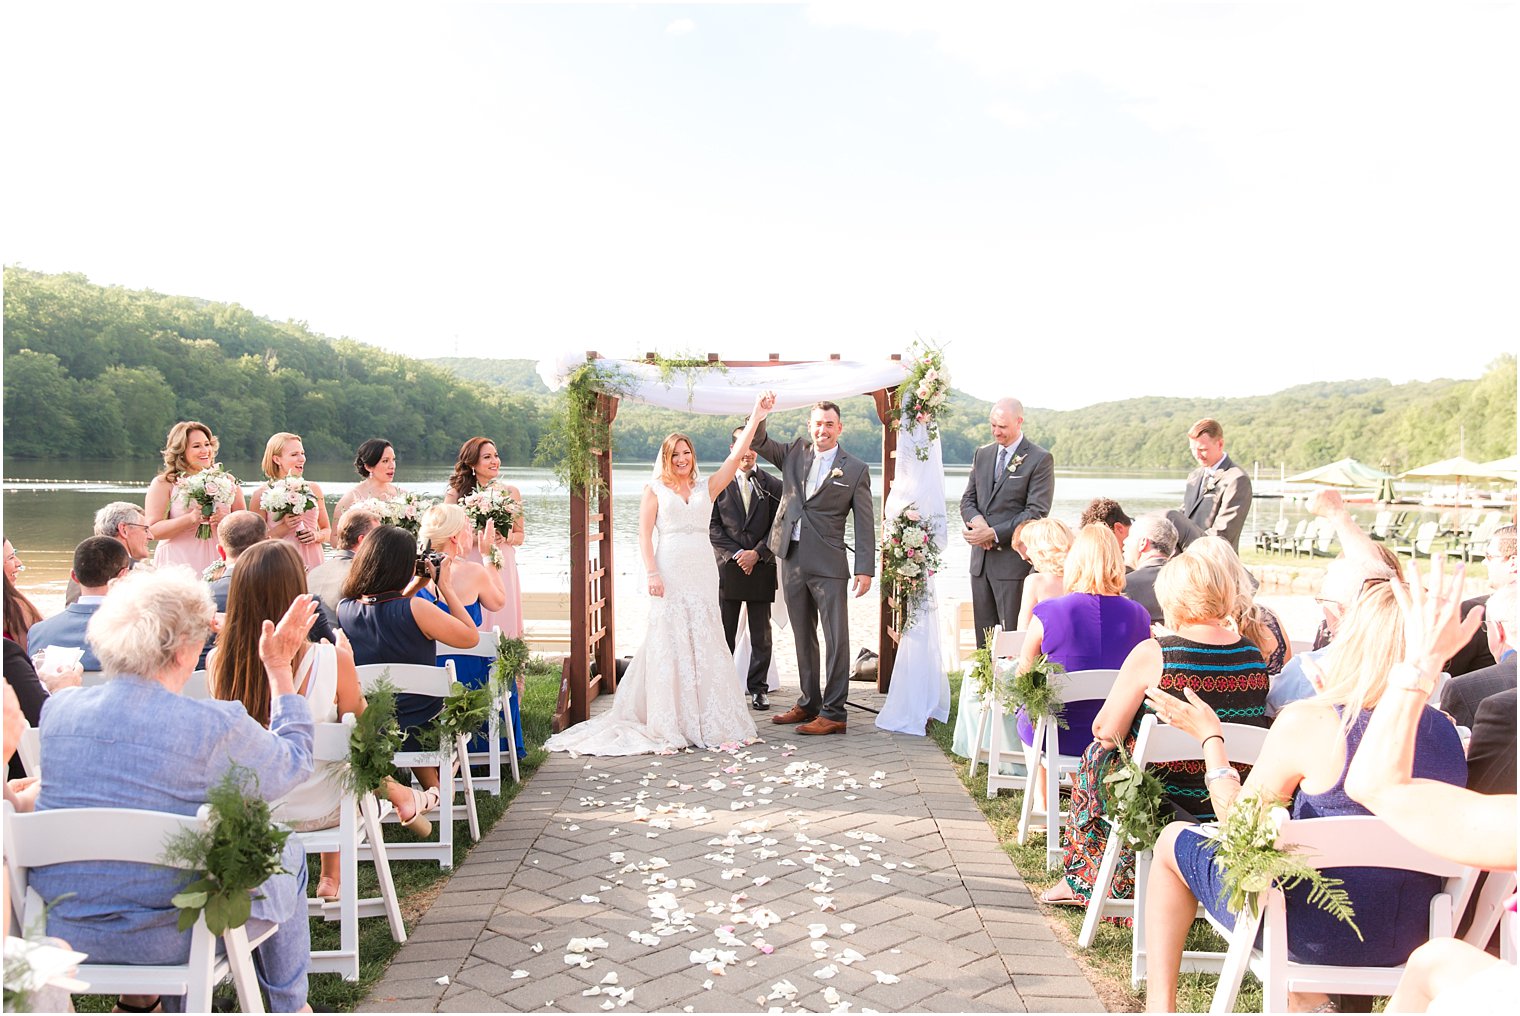 Bride and groom recessional